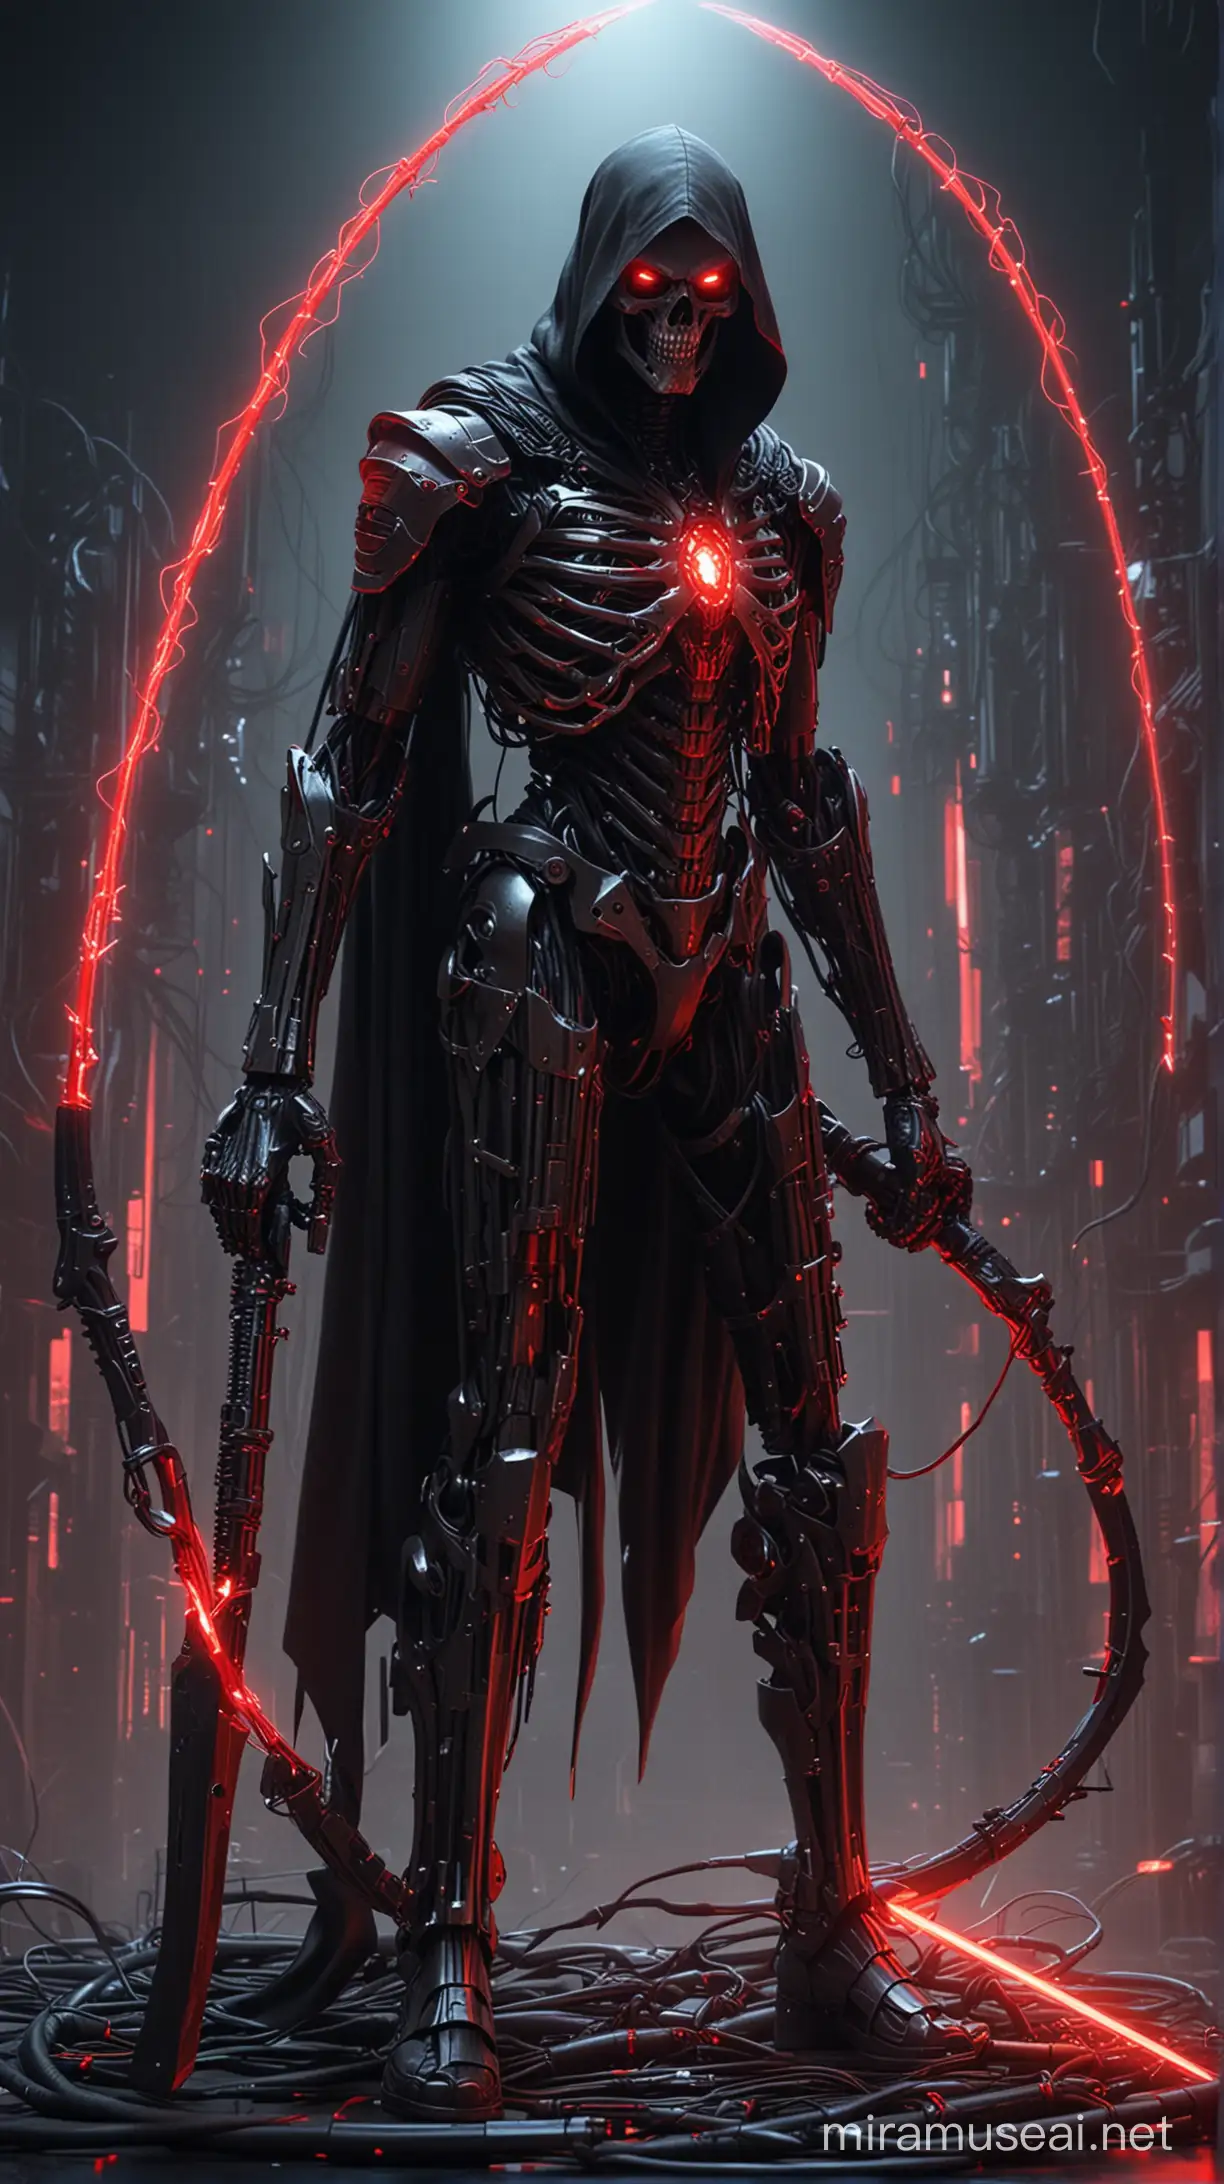 A cybernetically enhanced grim reaper with glowing red cybernetic implants, holding a sleek futuristic laser scythe, sitting on a cyber throne with exposed wires and red lighting, dystopian cityscape with dark lighting